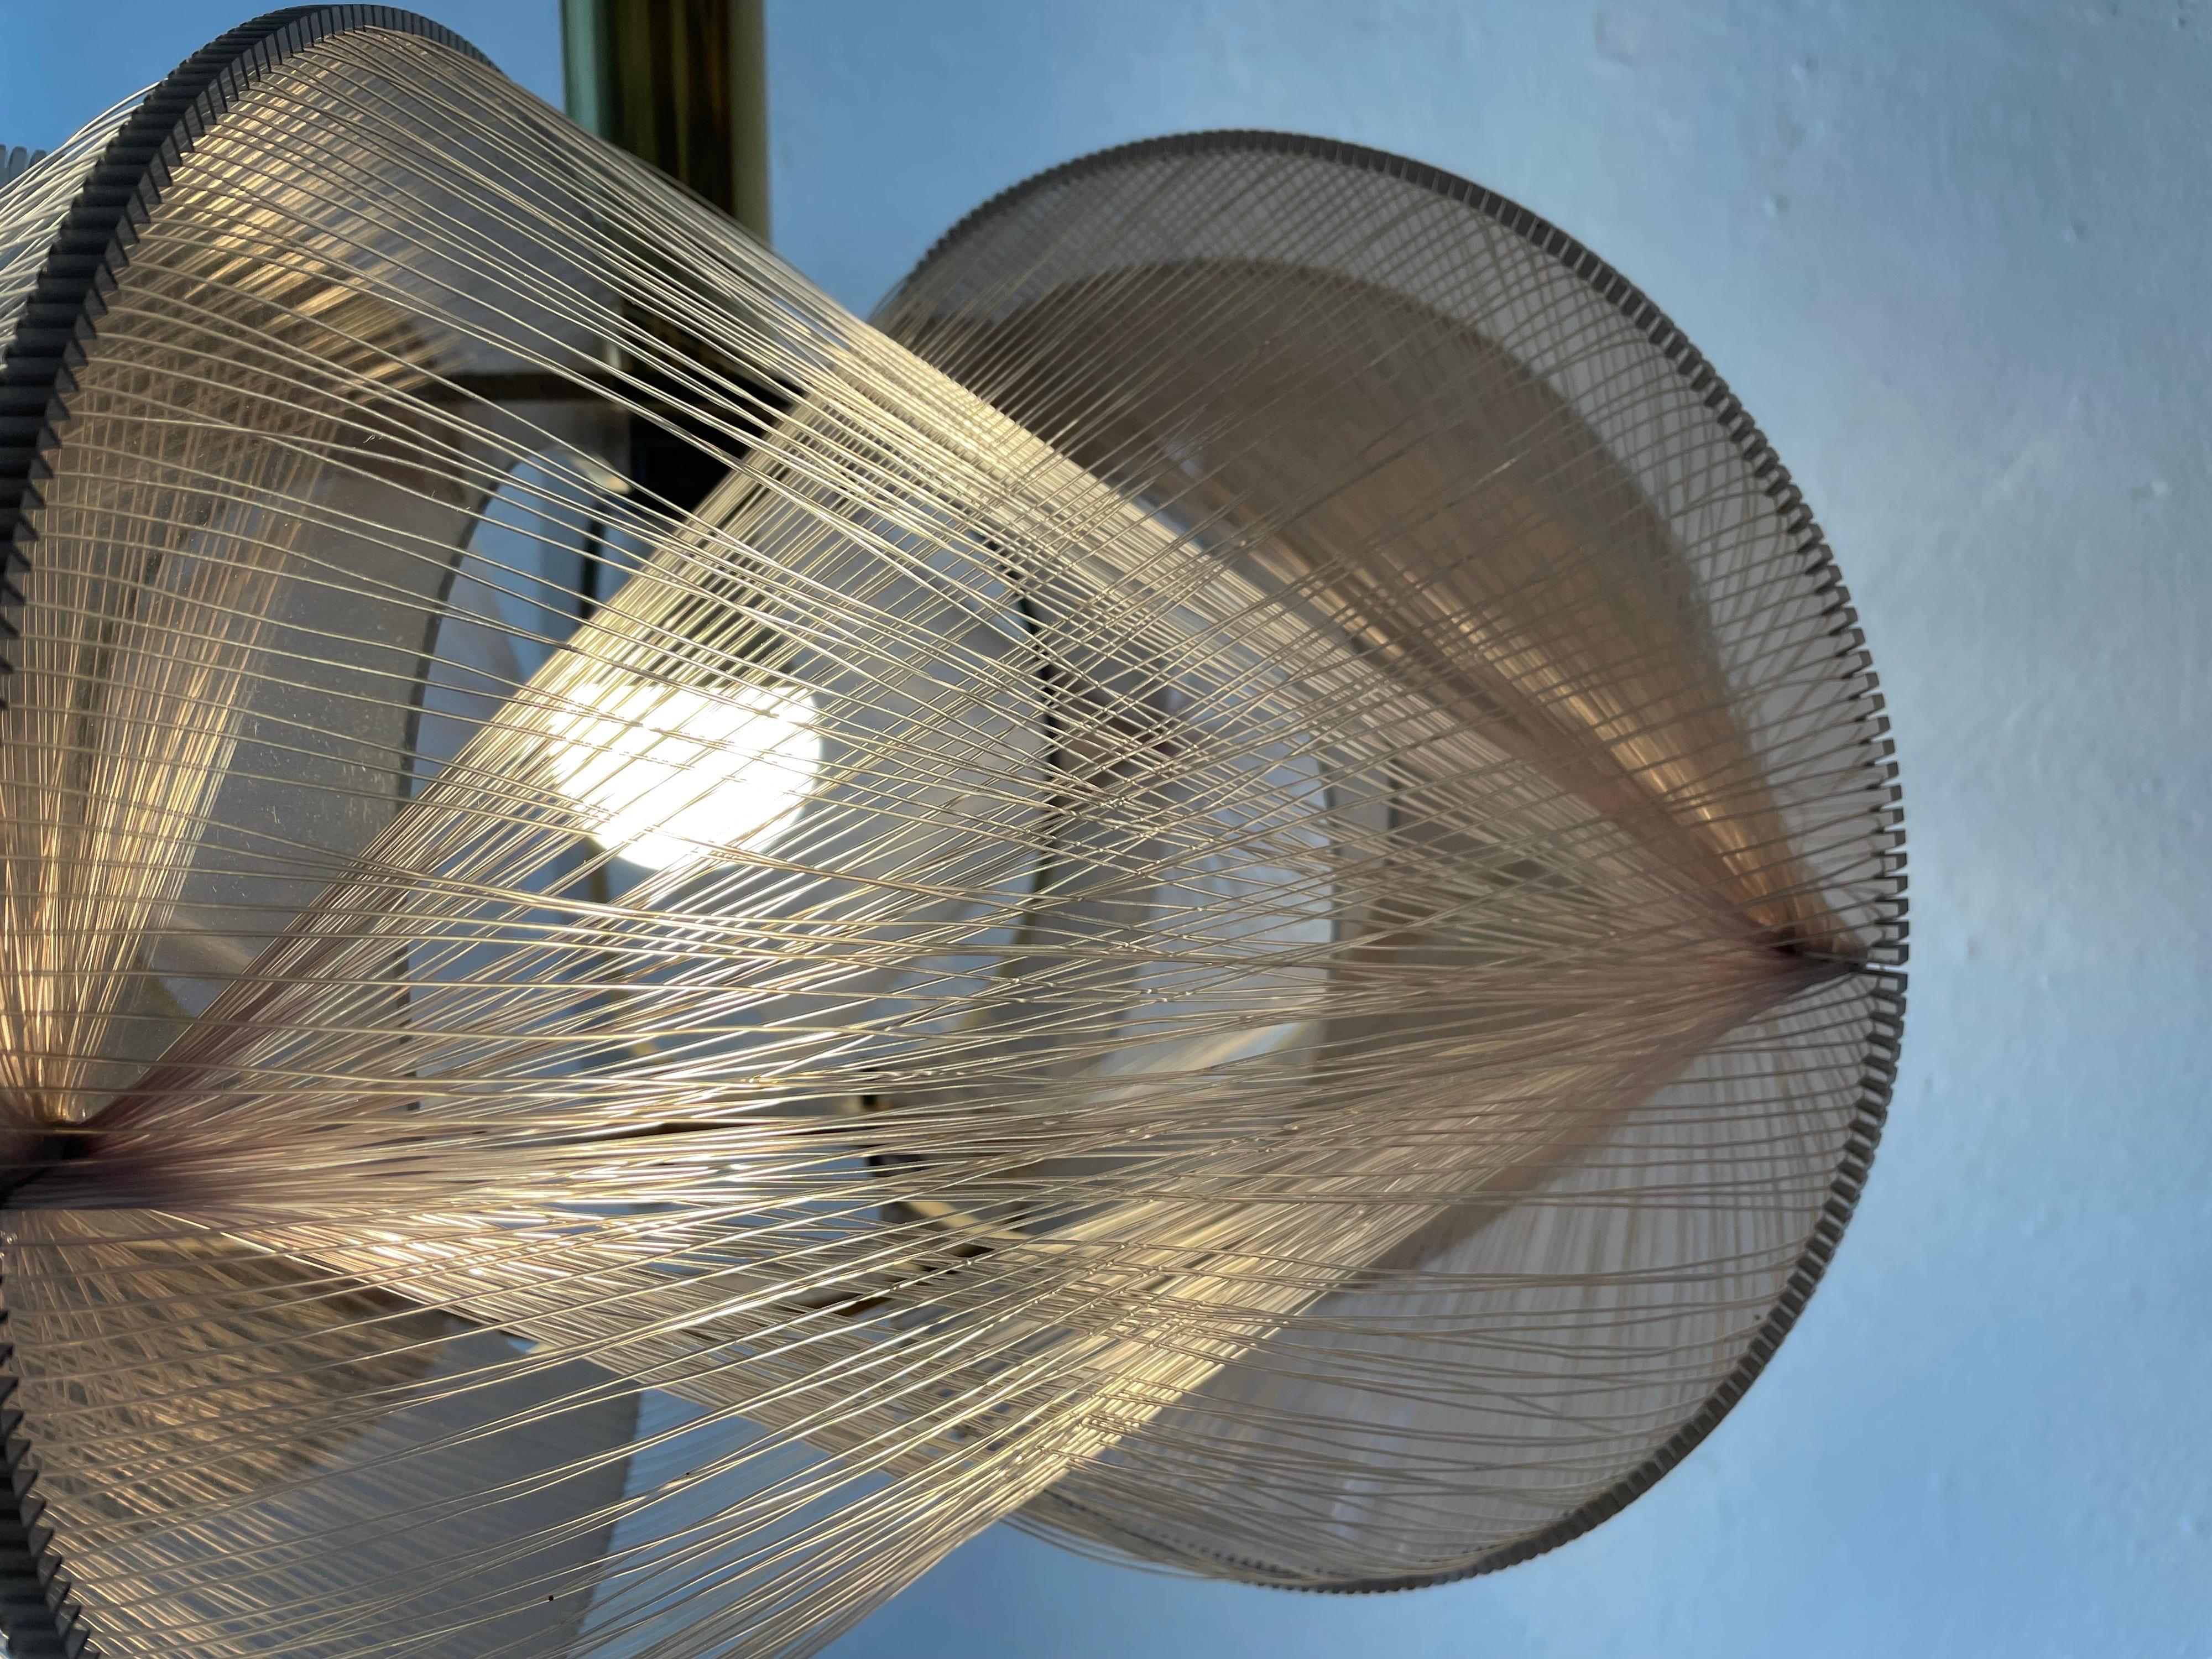 Plexiglass & Wired Pendant Lamp by Paul Secon for Sompex, 1970s, Germany 8